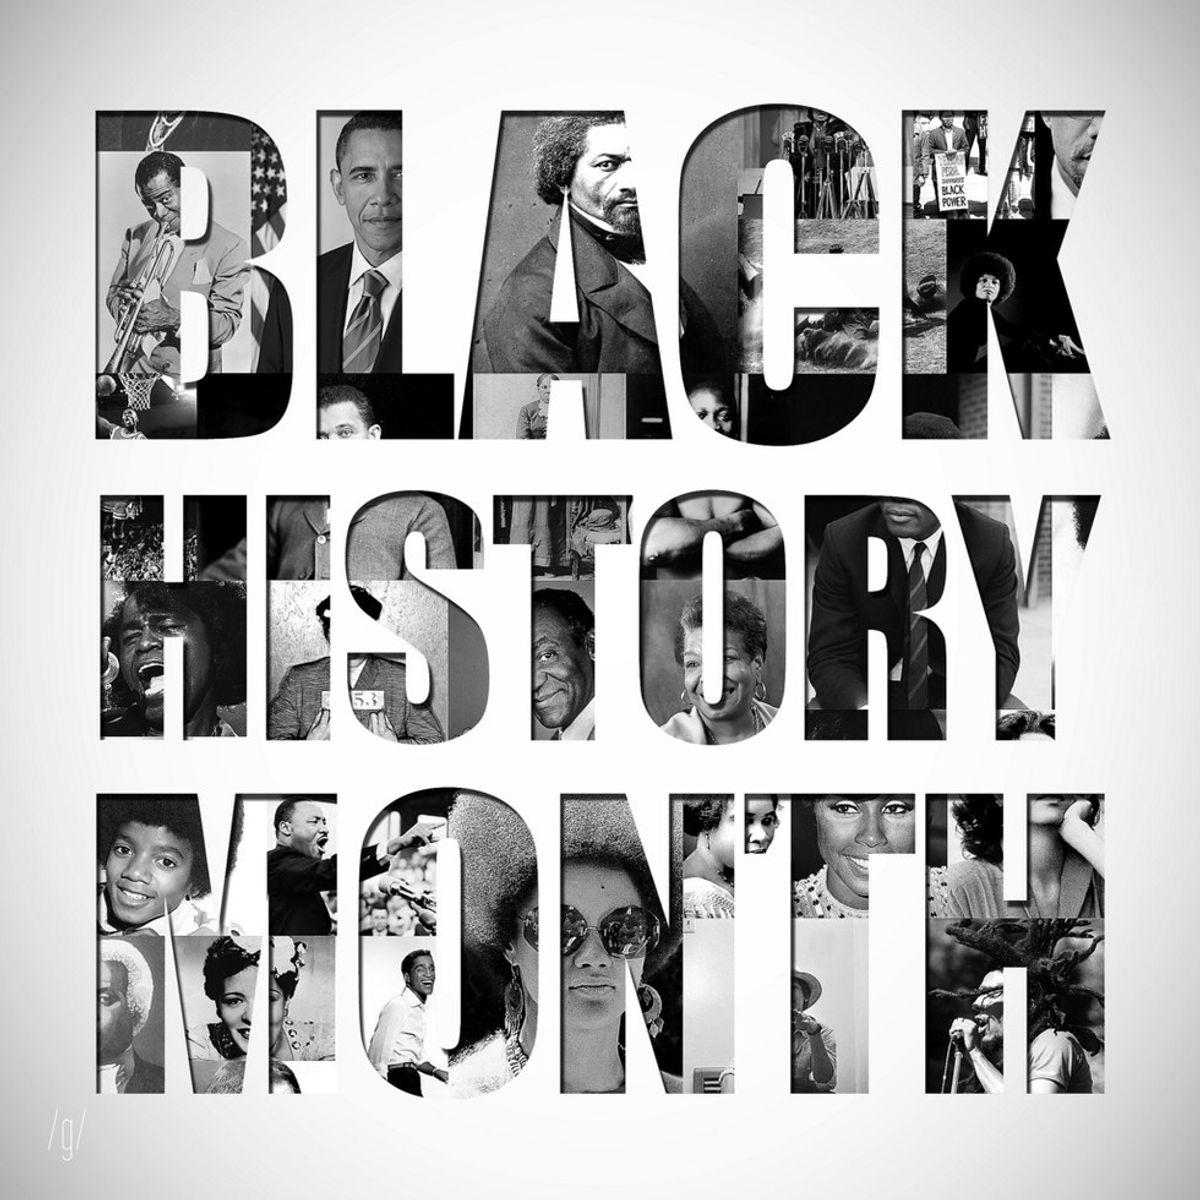 Black History Month: What Does This Mean?